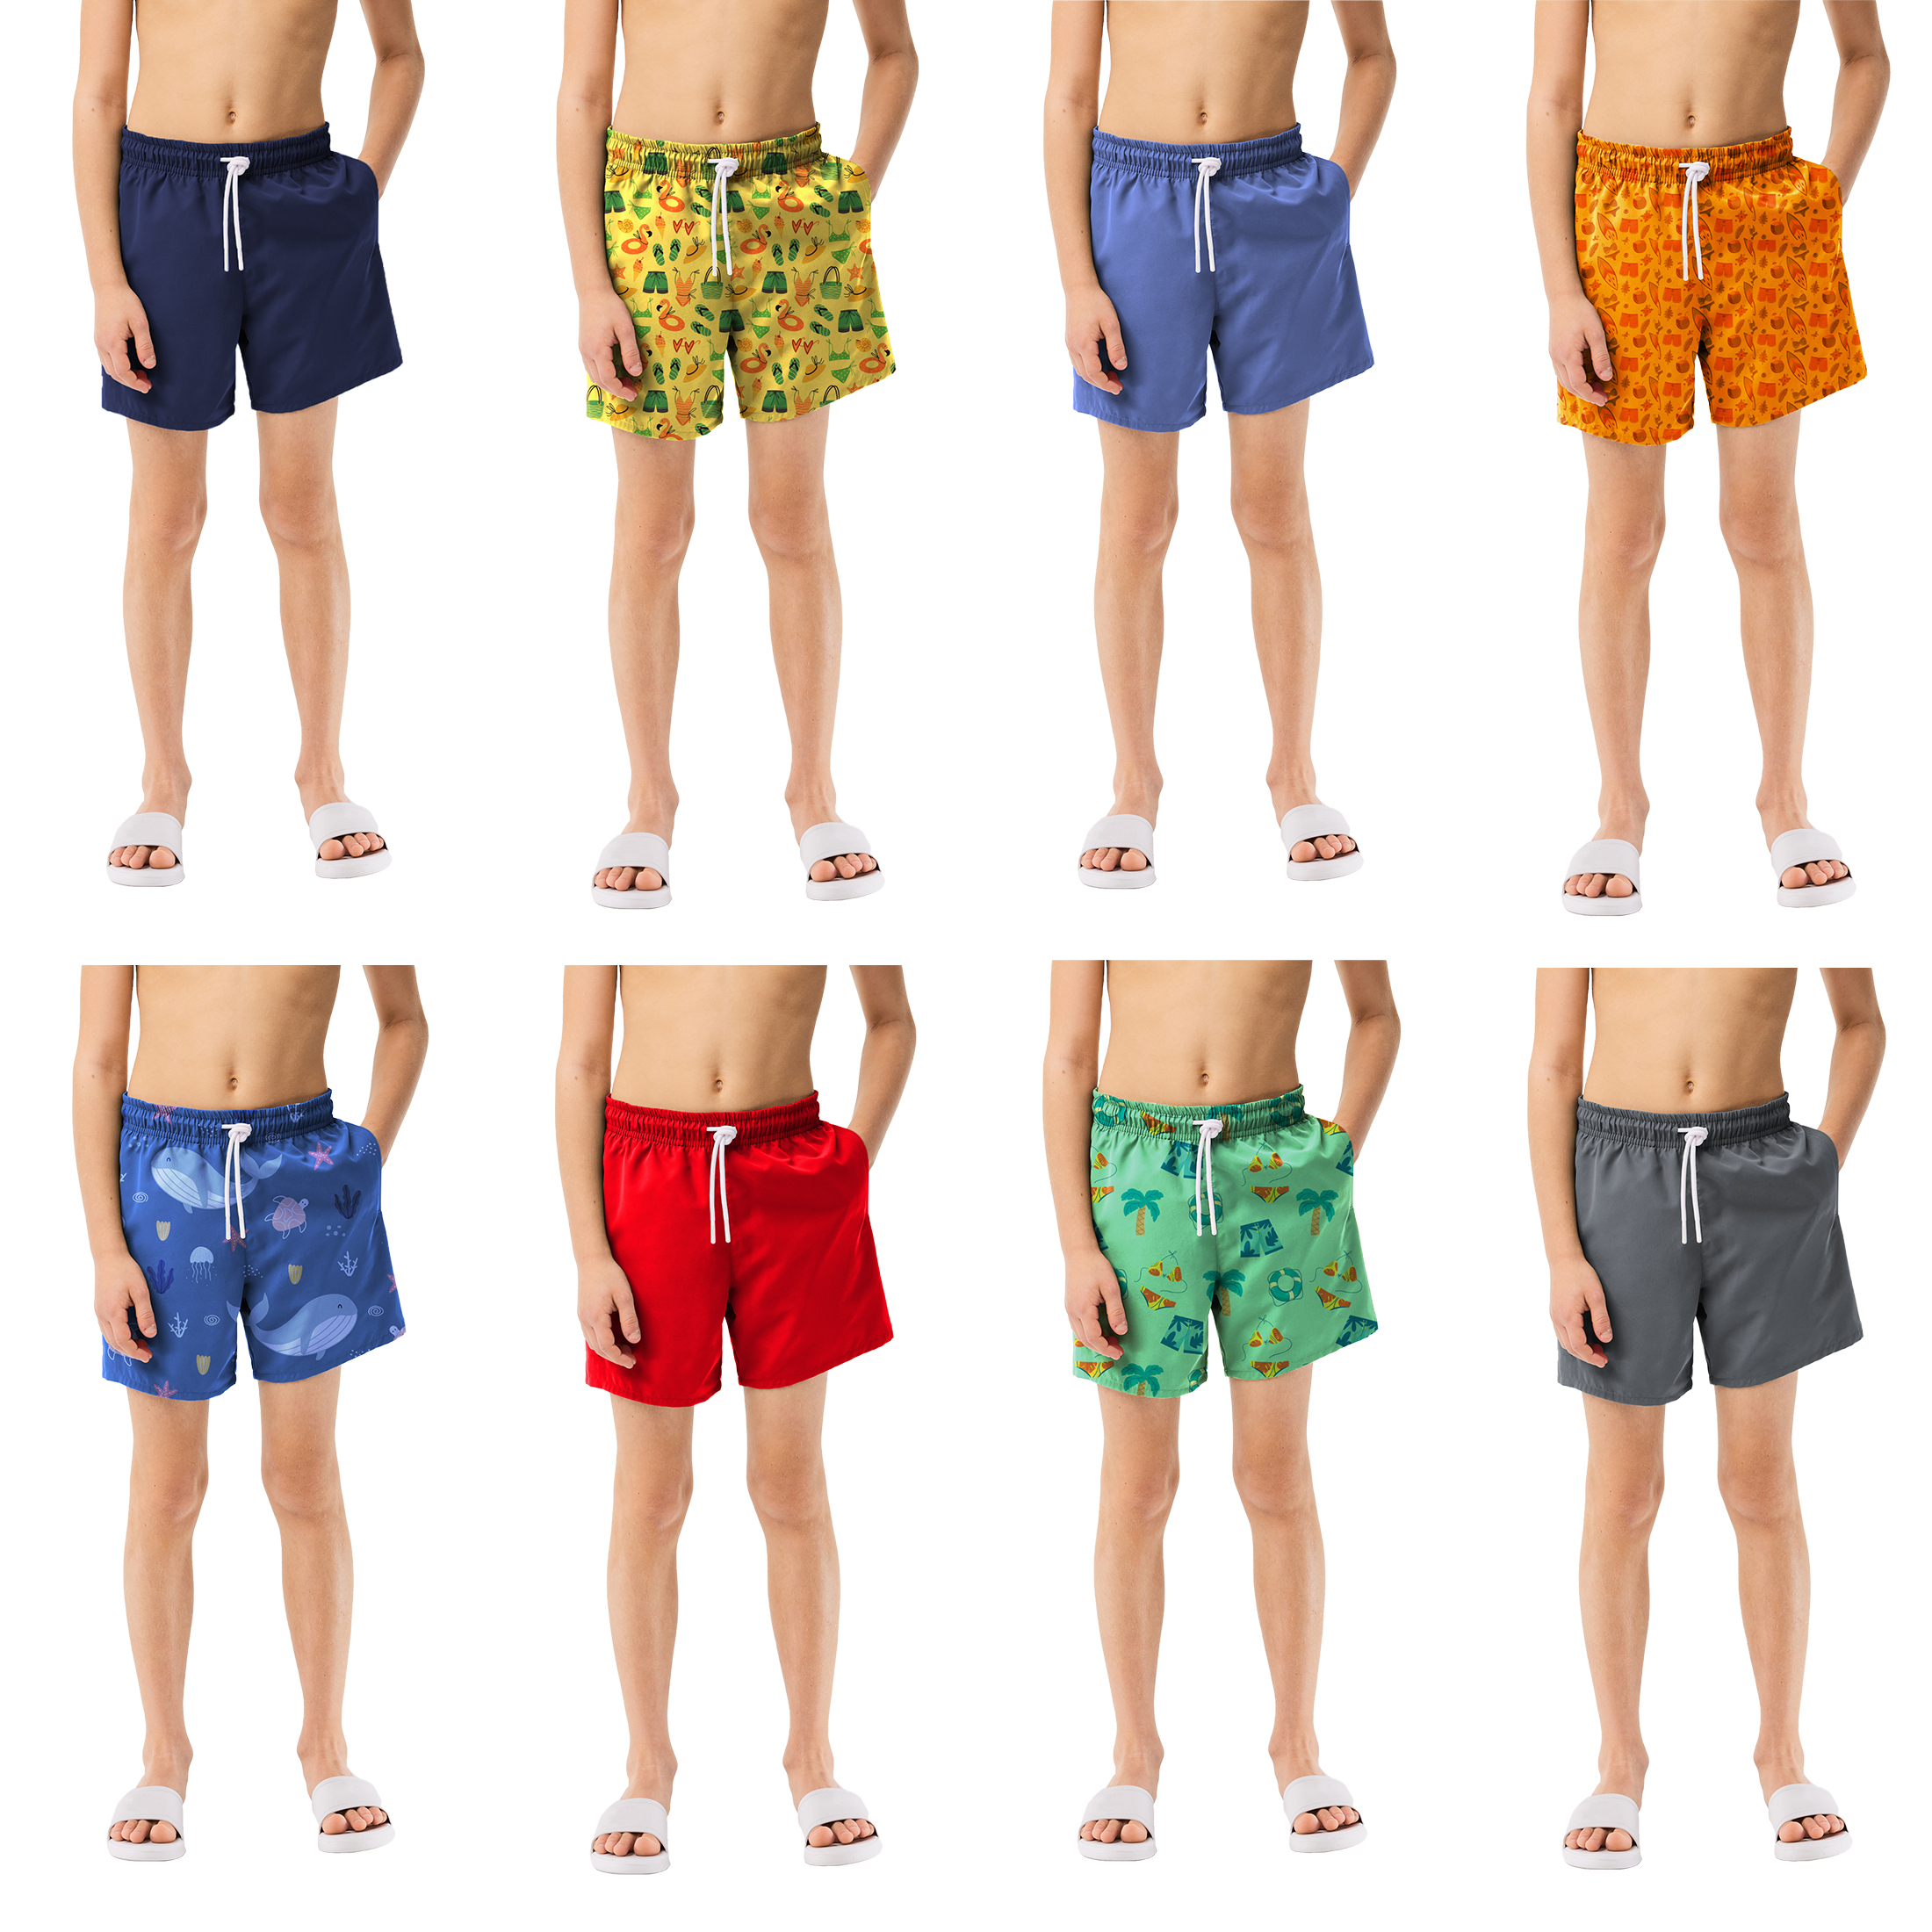 3-Pack: Boy's Quick-Dry Solid & Print Active Summer Beach Swimming Trunks Shorts - Solid, Medium